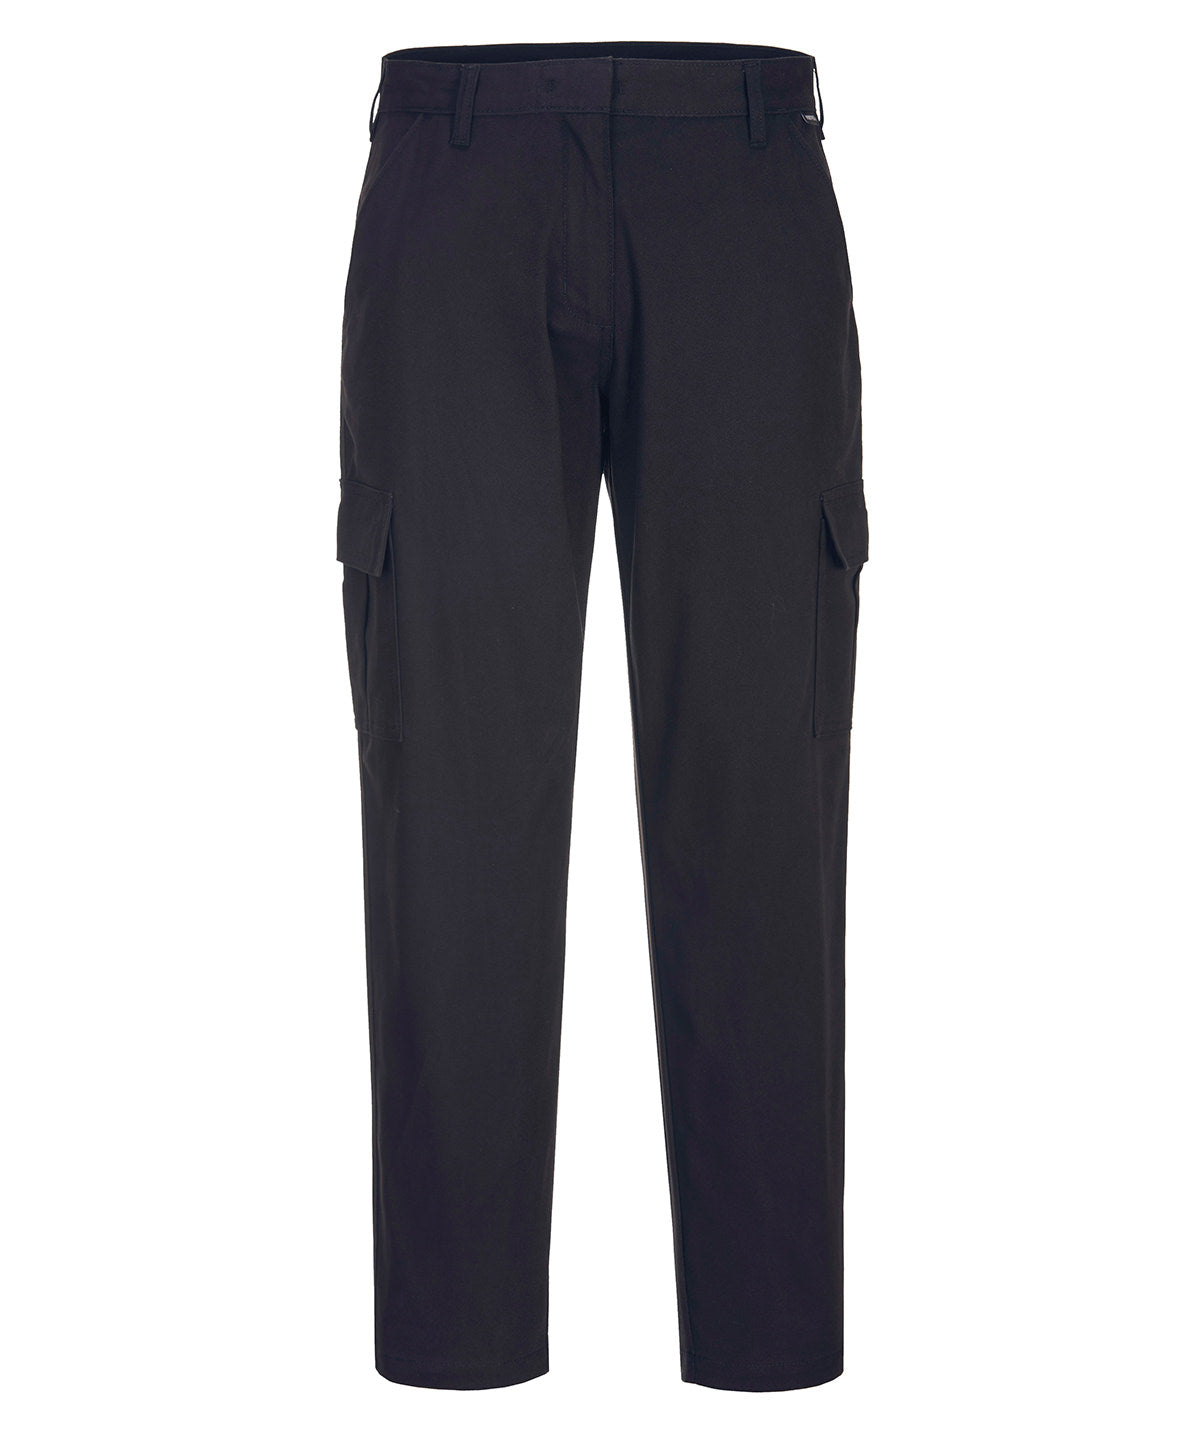 Womens stretch cargo trousers (S233) slim fit | Black